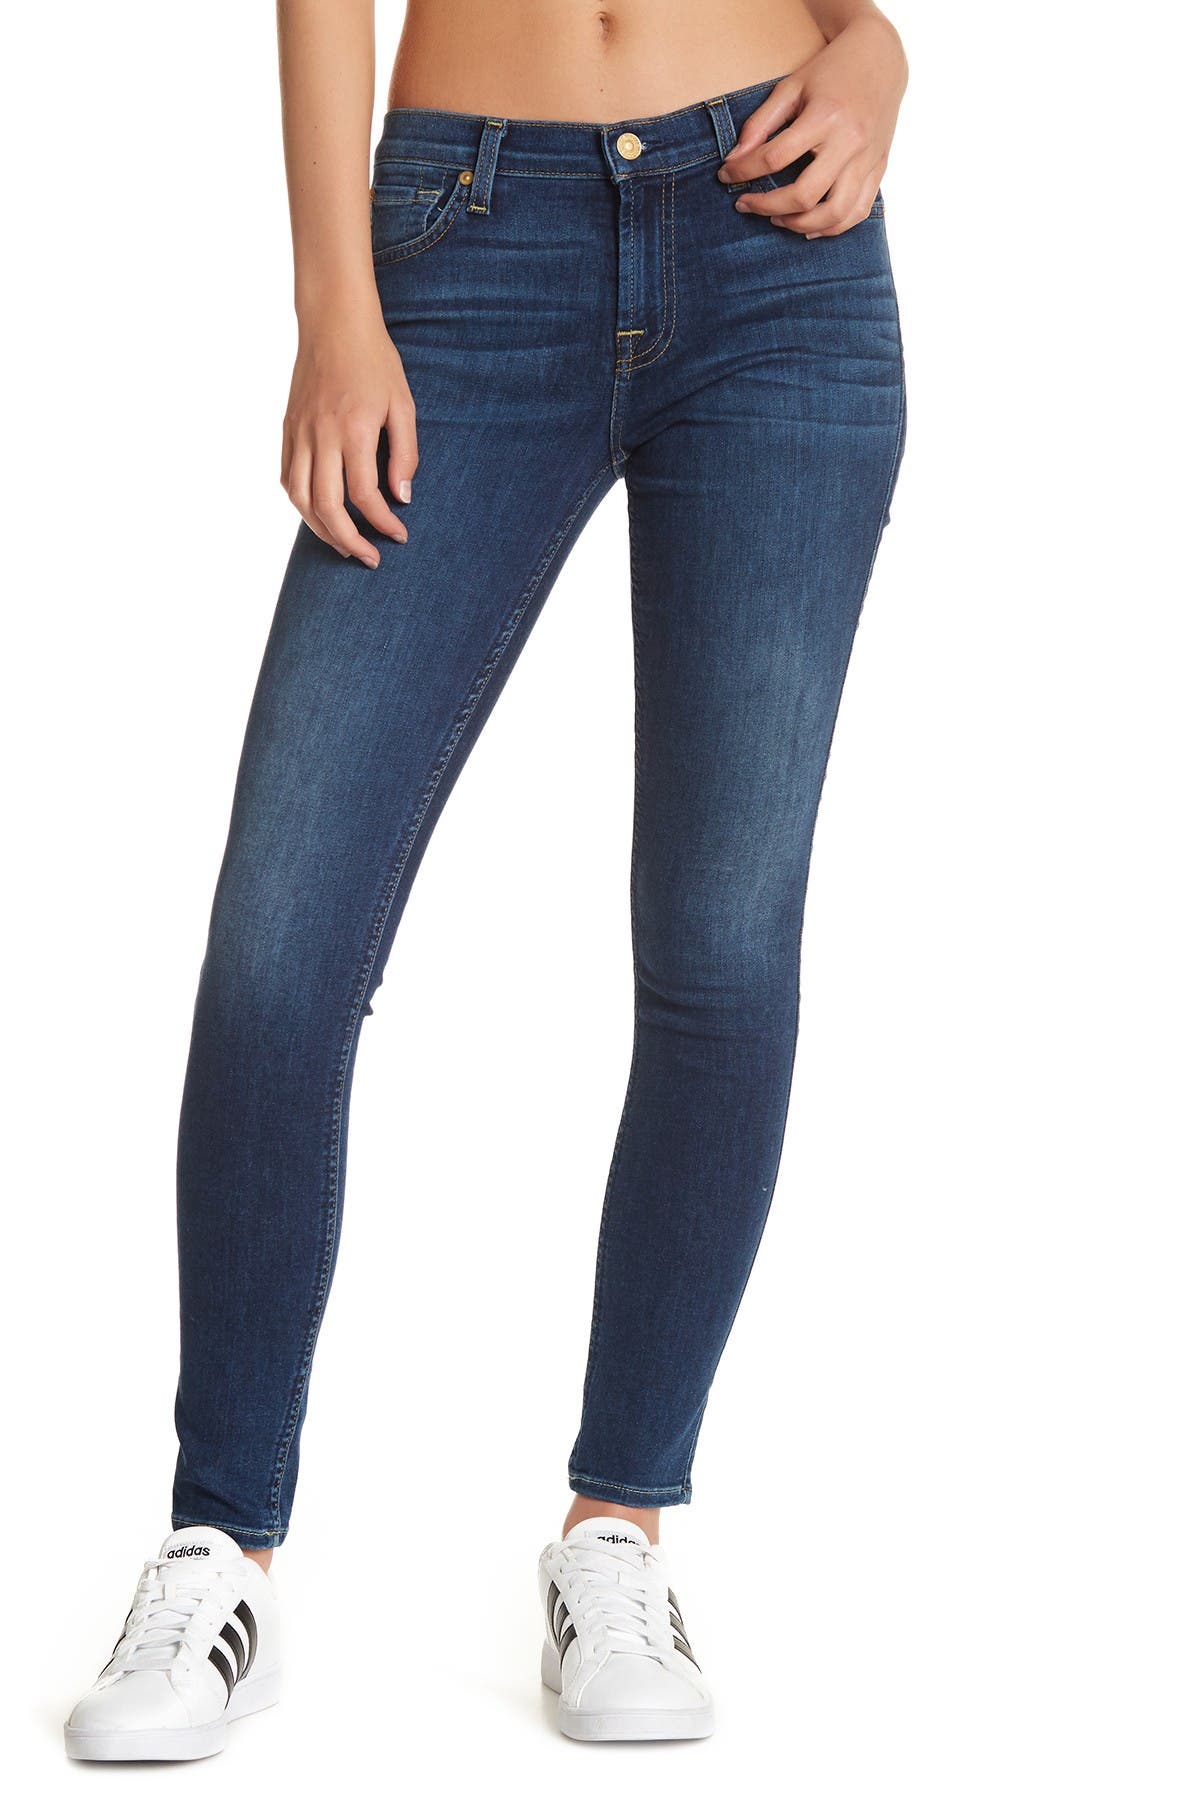 7 For All Mankind Gwenevere Skinny Jeans Nordstrom Rack